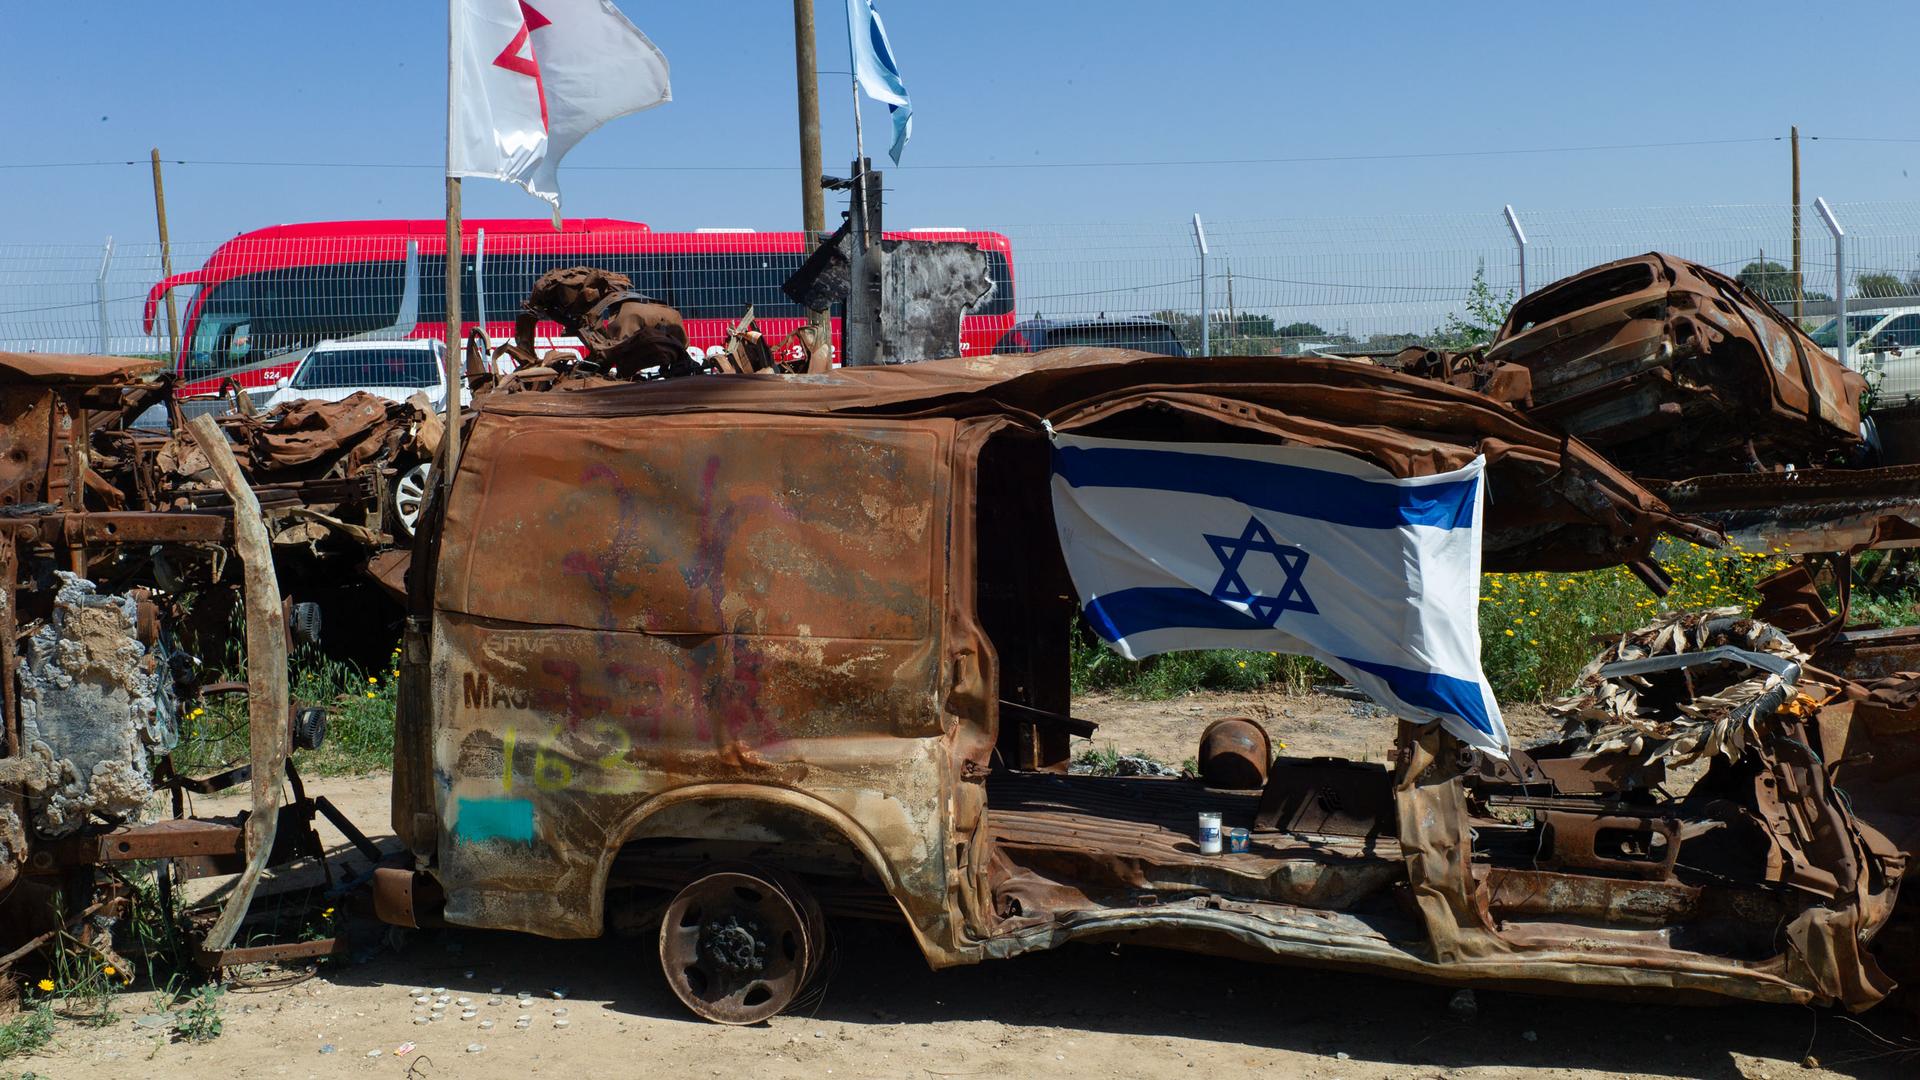 In the Israeli town of Tkuma, about 3 miles from the Gaza strip, vehicles in various states of destruction sit in a giant lot.